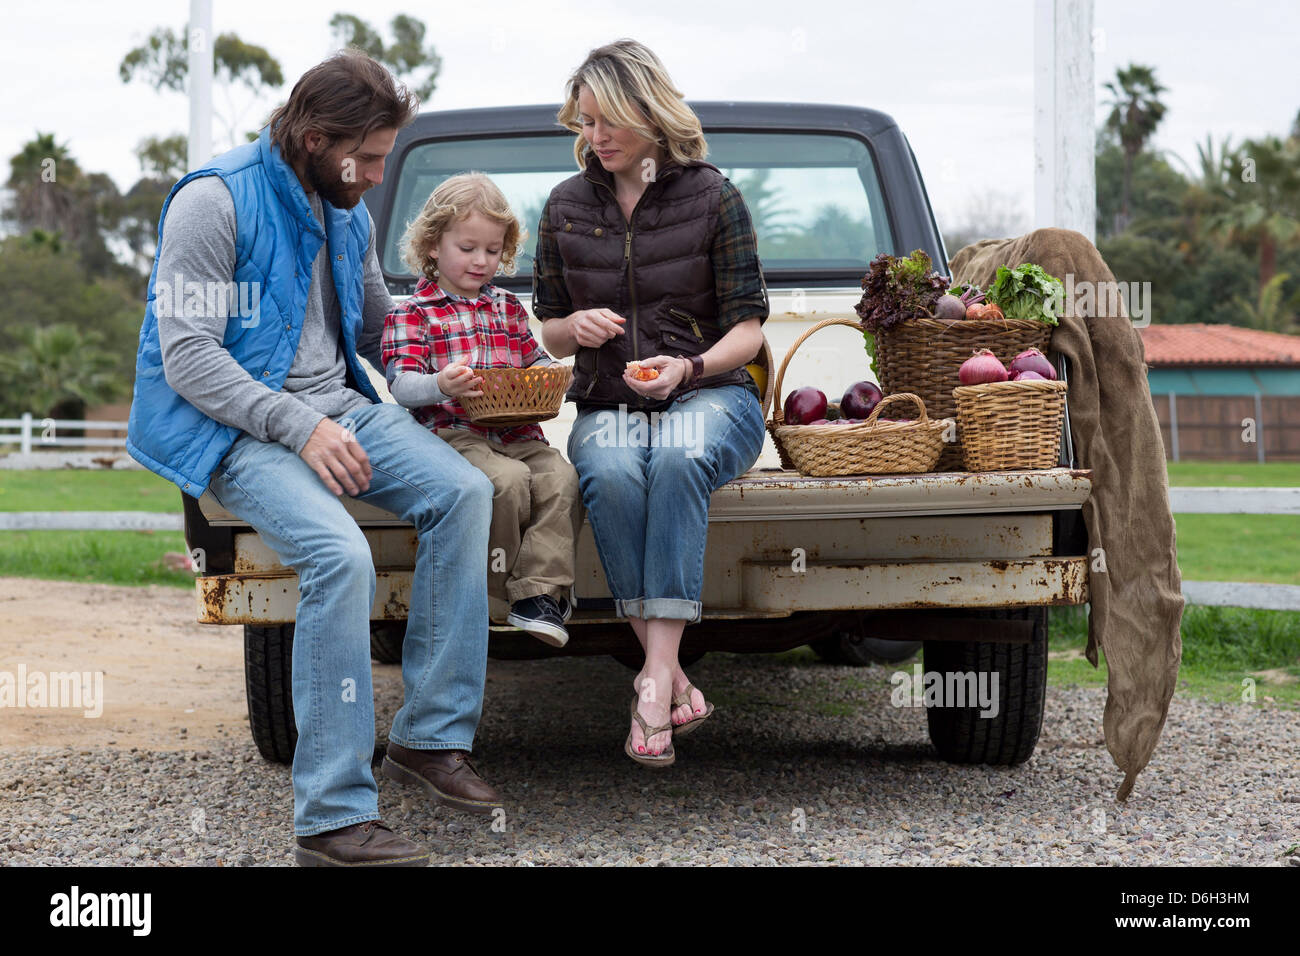 Family with produce in truck bed Stock Photo